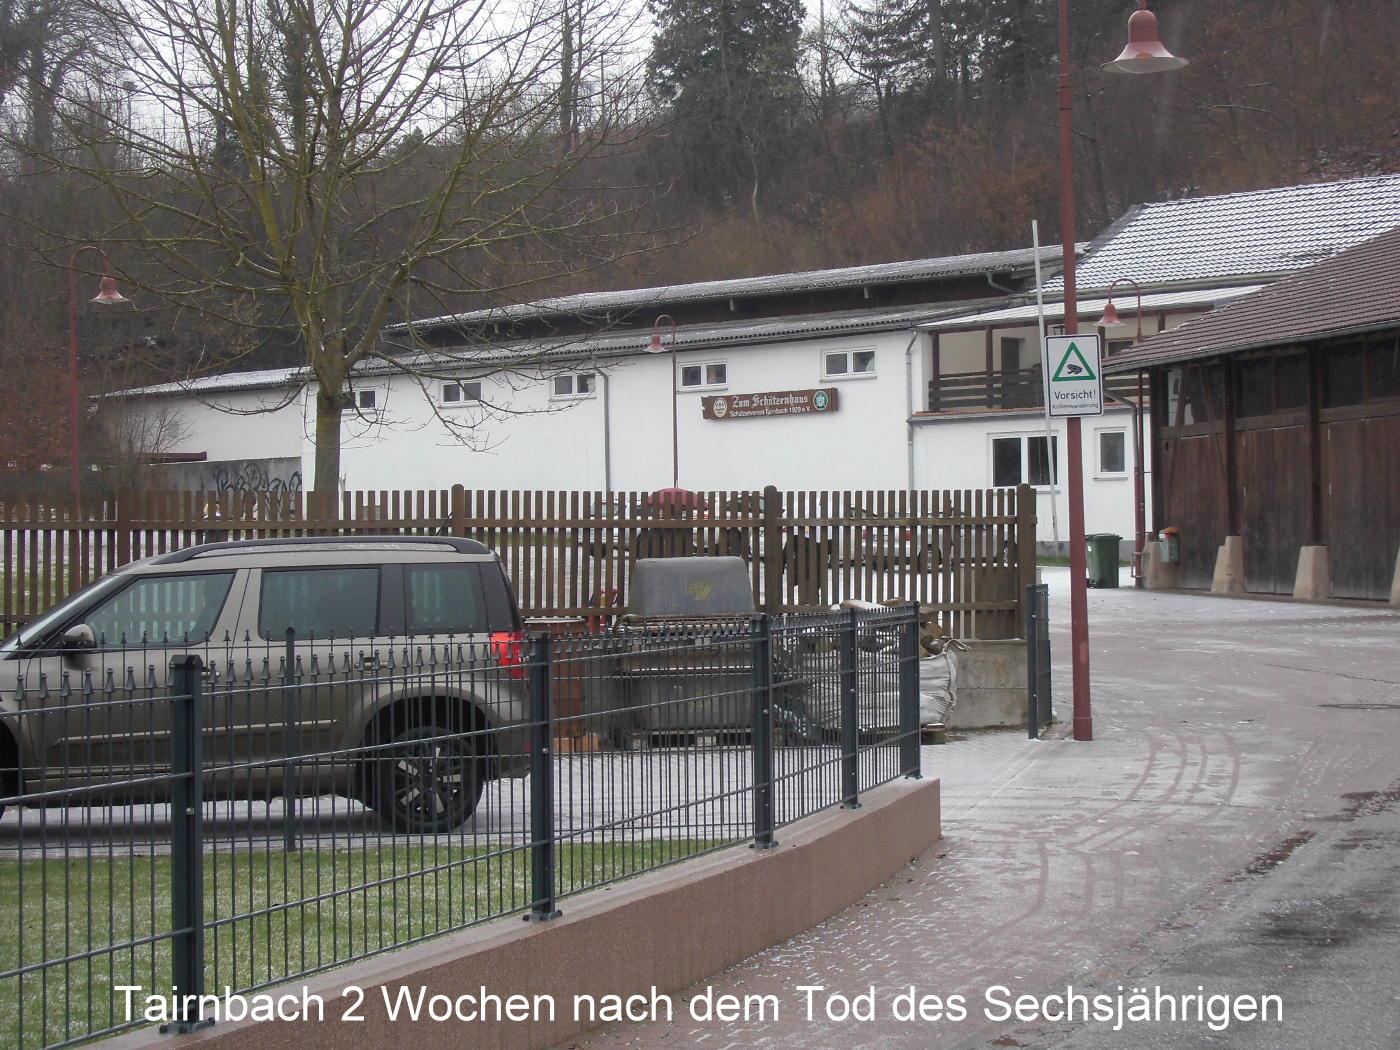 Two weeks after the death of the six-year-old in Walldorf